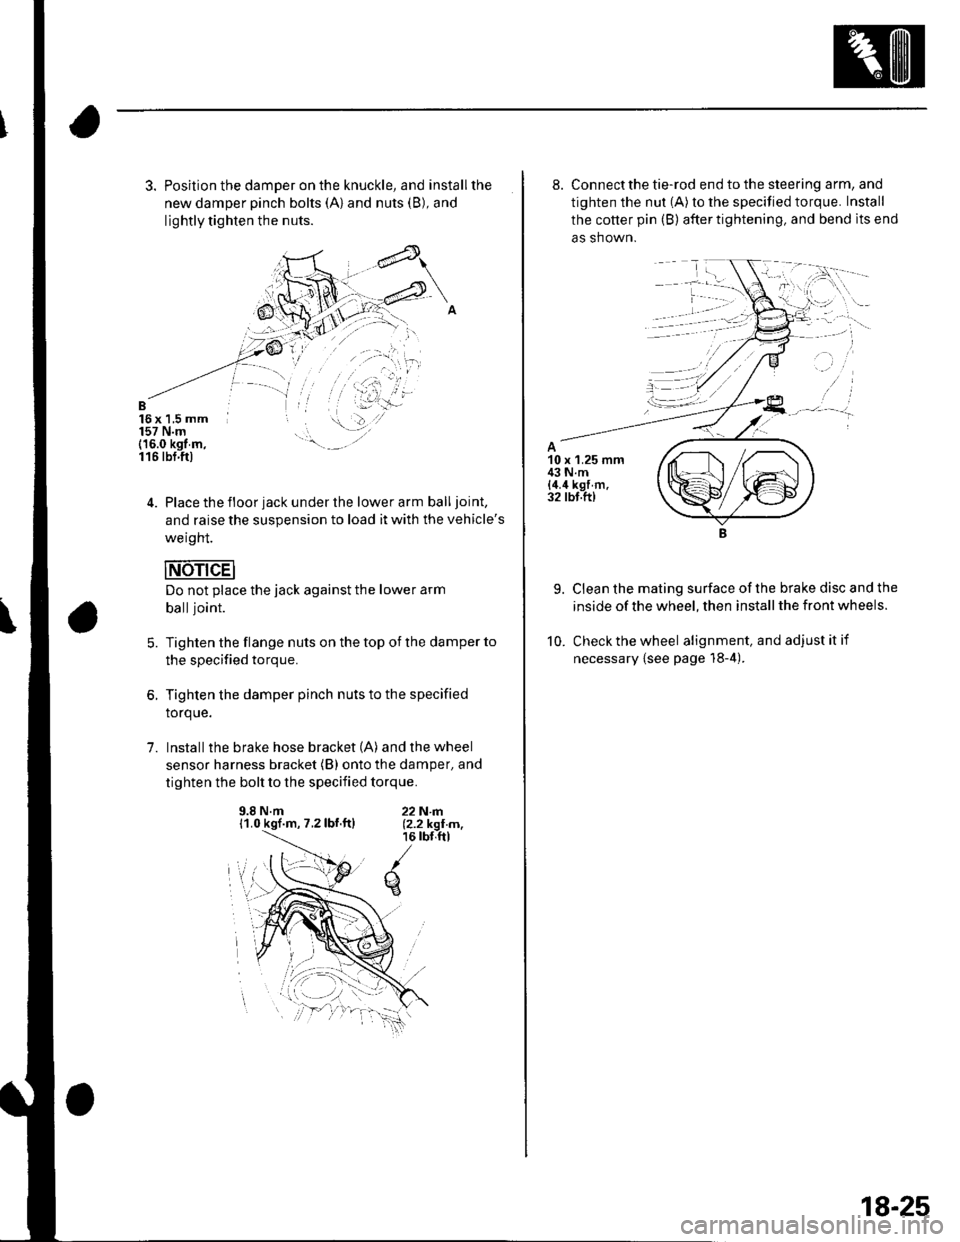 HONDA CIVIC 2002 7.G Service Manual 3. Position the damper on the knuckle, and installthe
new damper pinch bolts (A) and nuts (B), and
lightly tighten the nuts.
B16x 1,5 mm157 N.m(16.0 kgt m,116 tbt.ftl
4. Place the floor jack under the